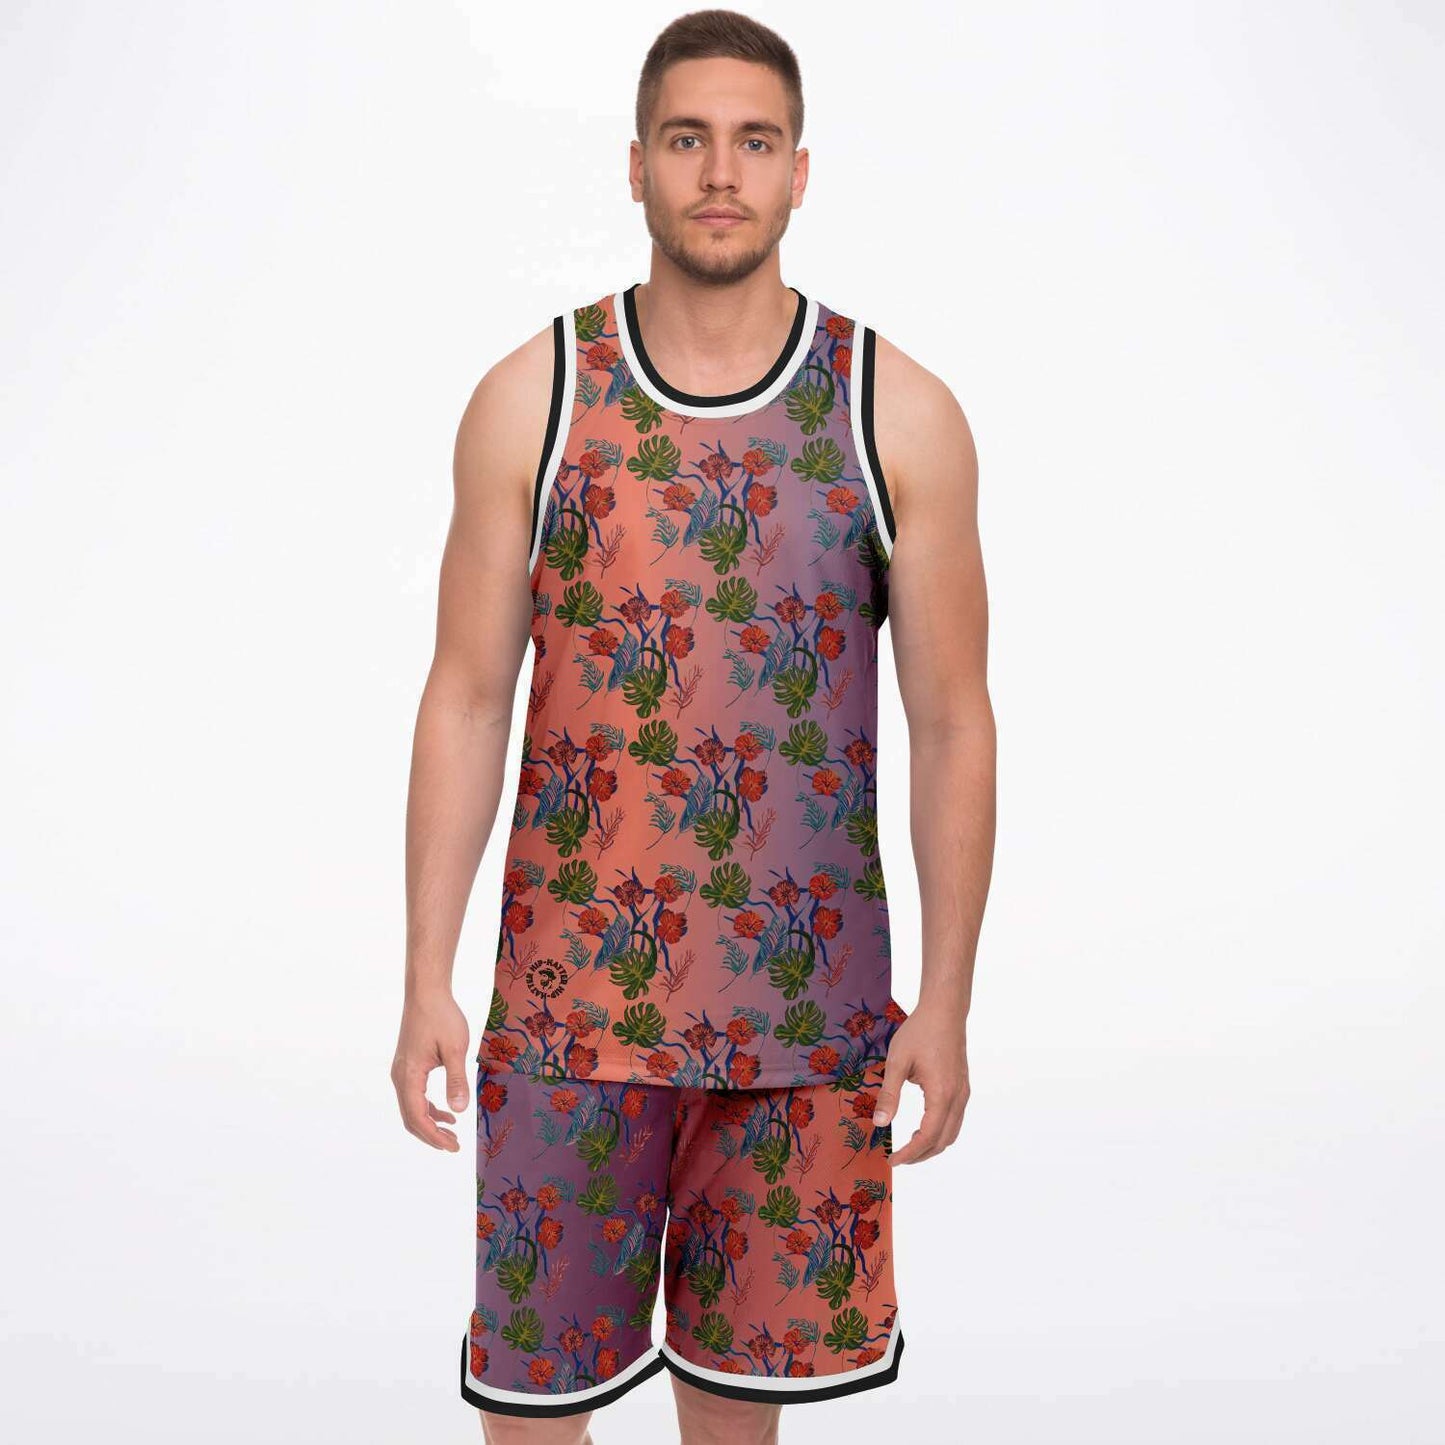 Tropical Floral Print Dawn Basketball Jersey and Shorts Set - HipHatter